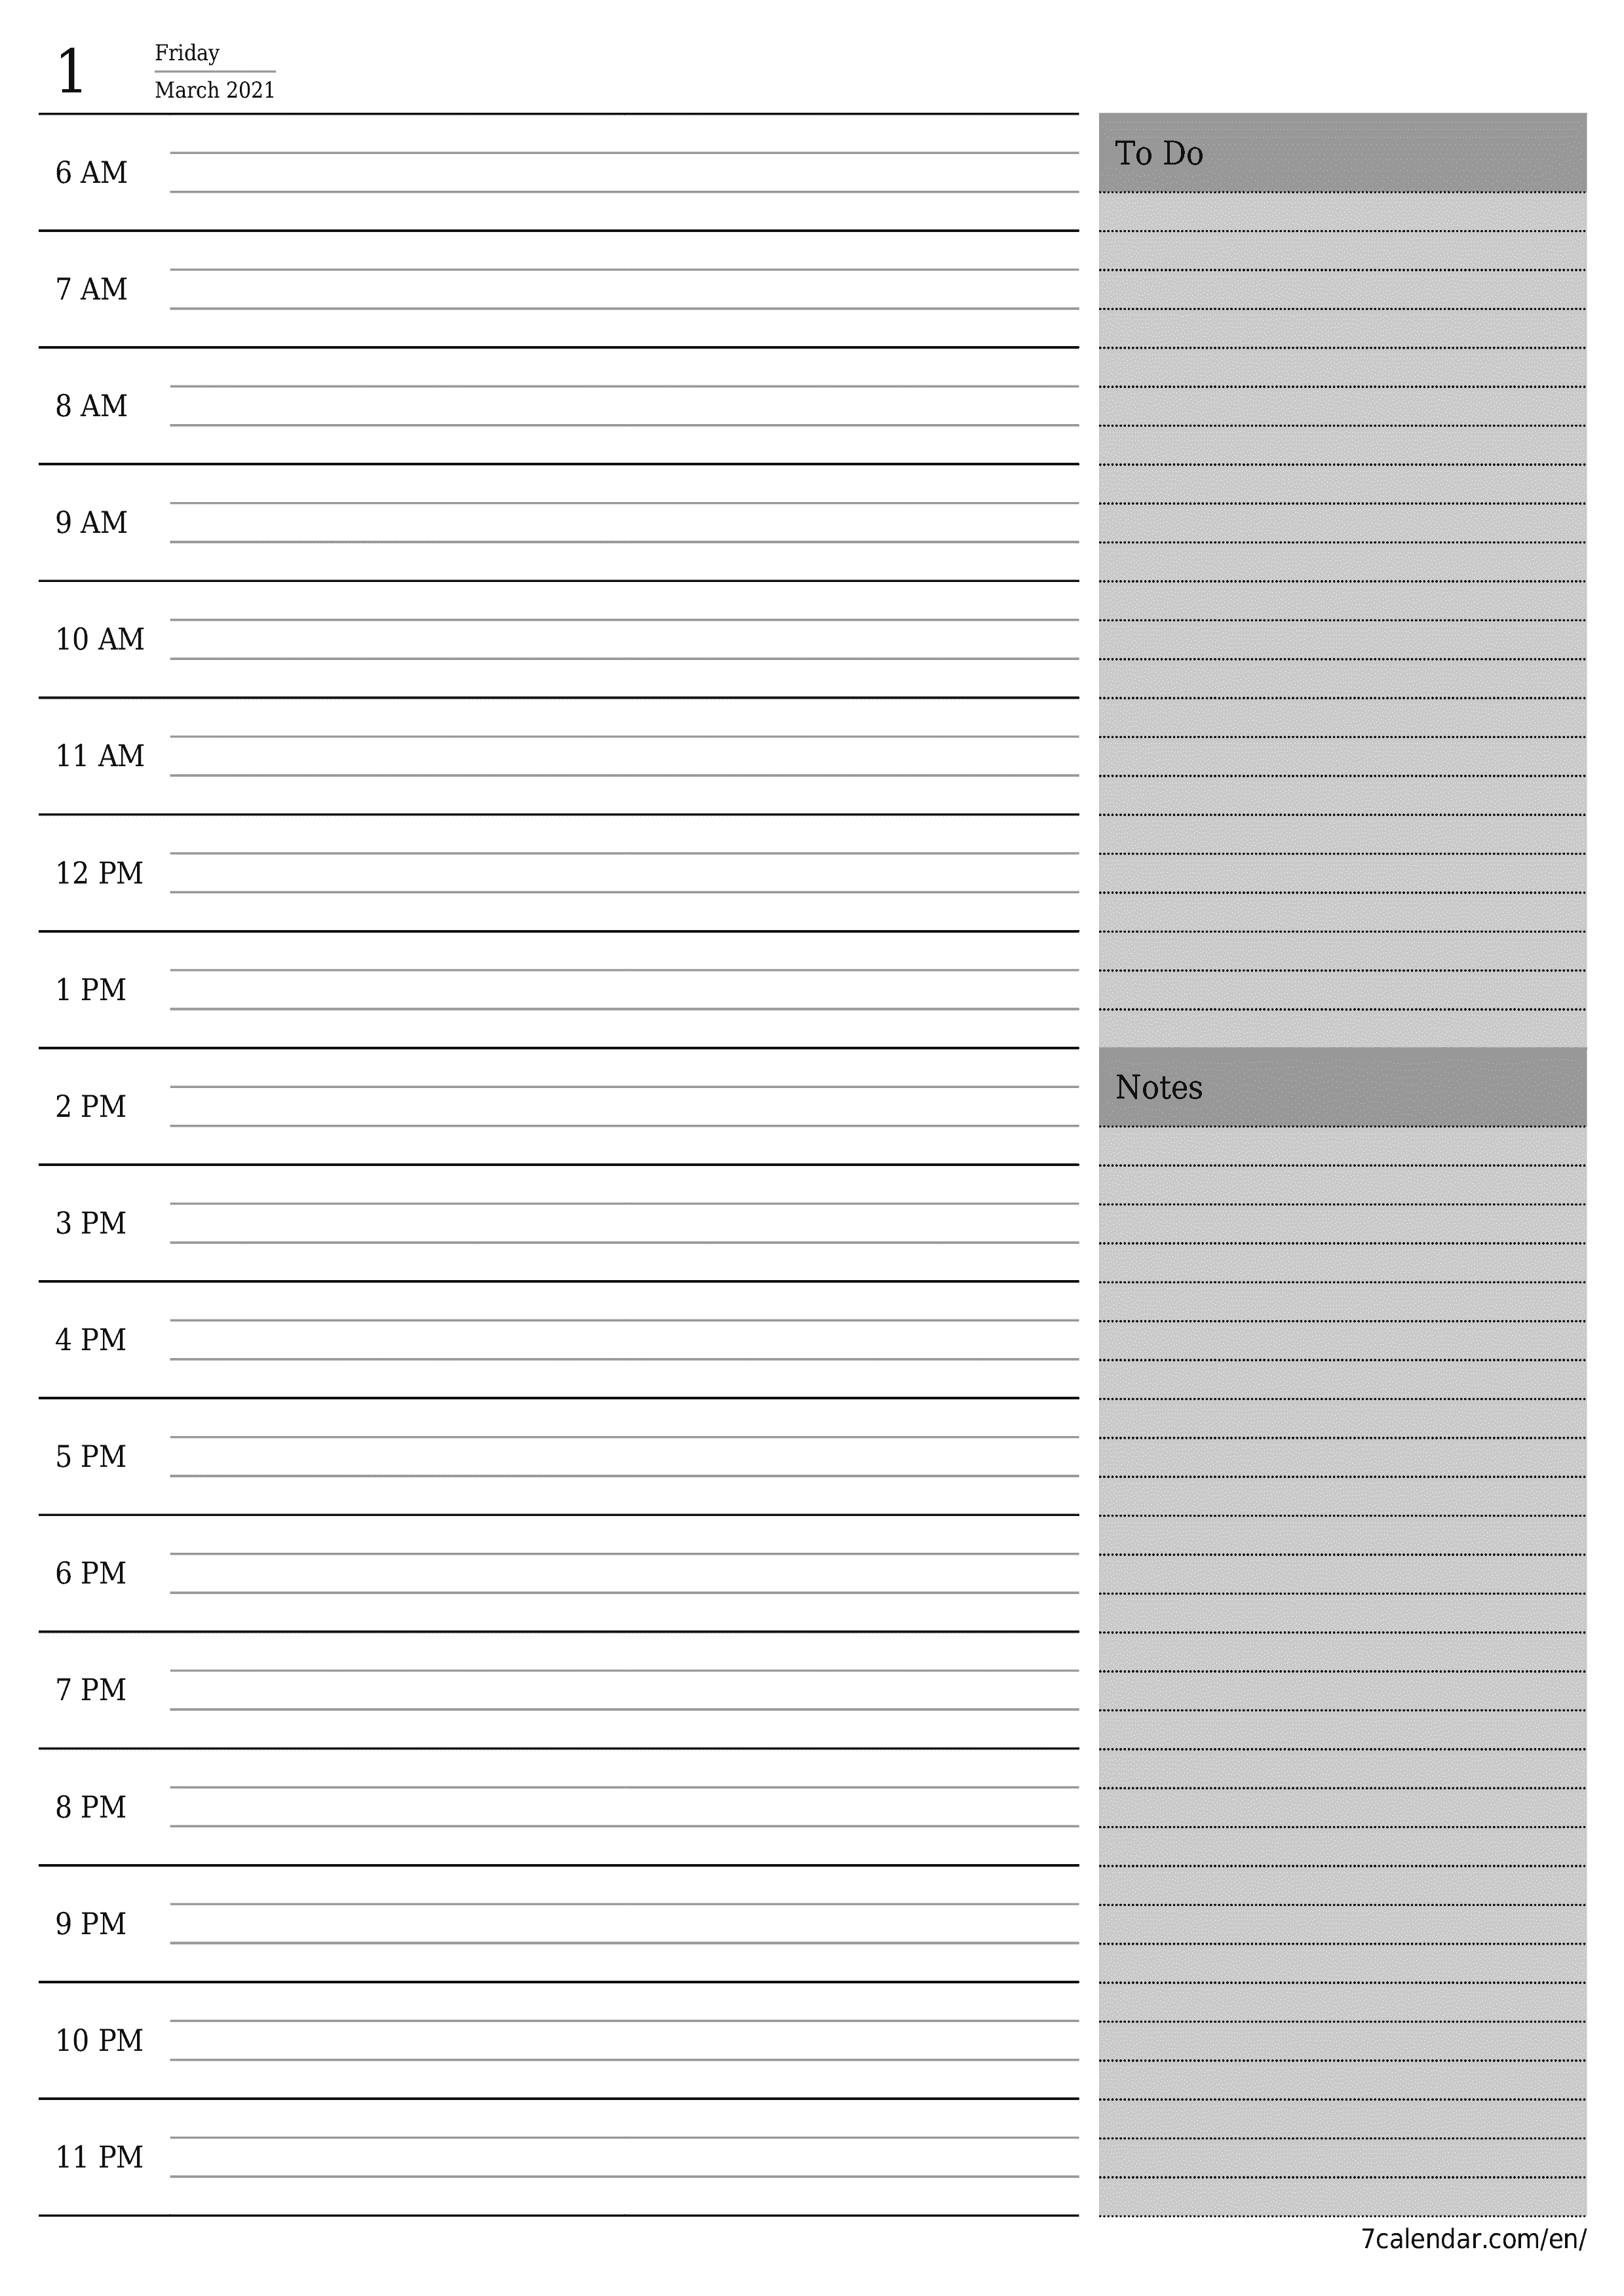 Blank daily calendar planner for day March 2021 with notes, save and print to PDF PNG English - 7calendar.com